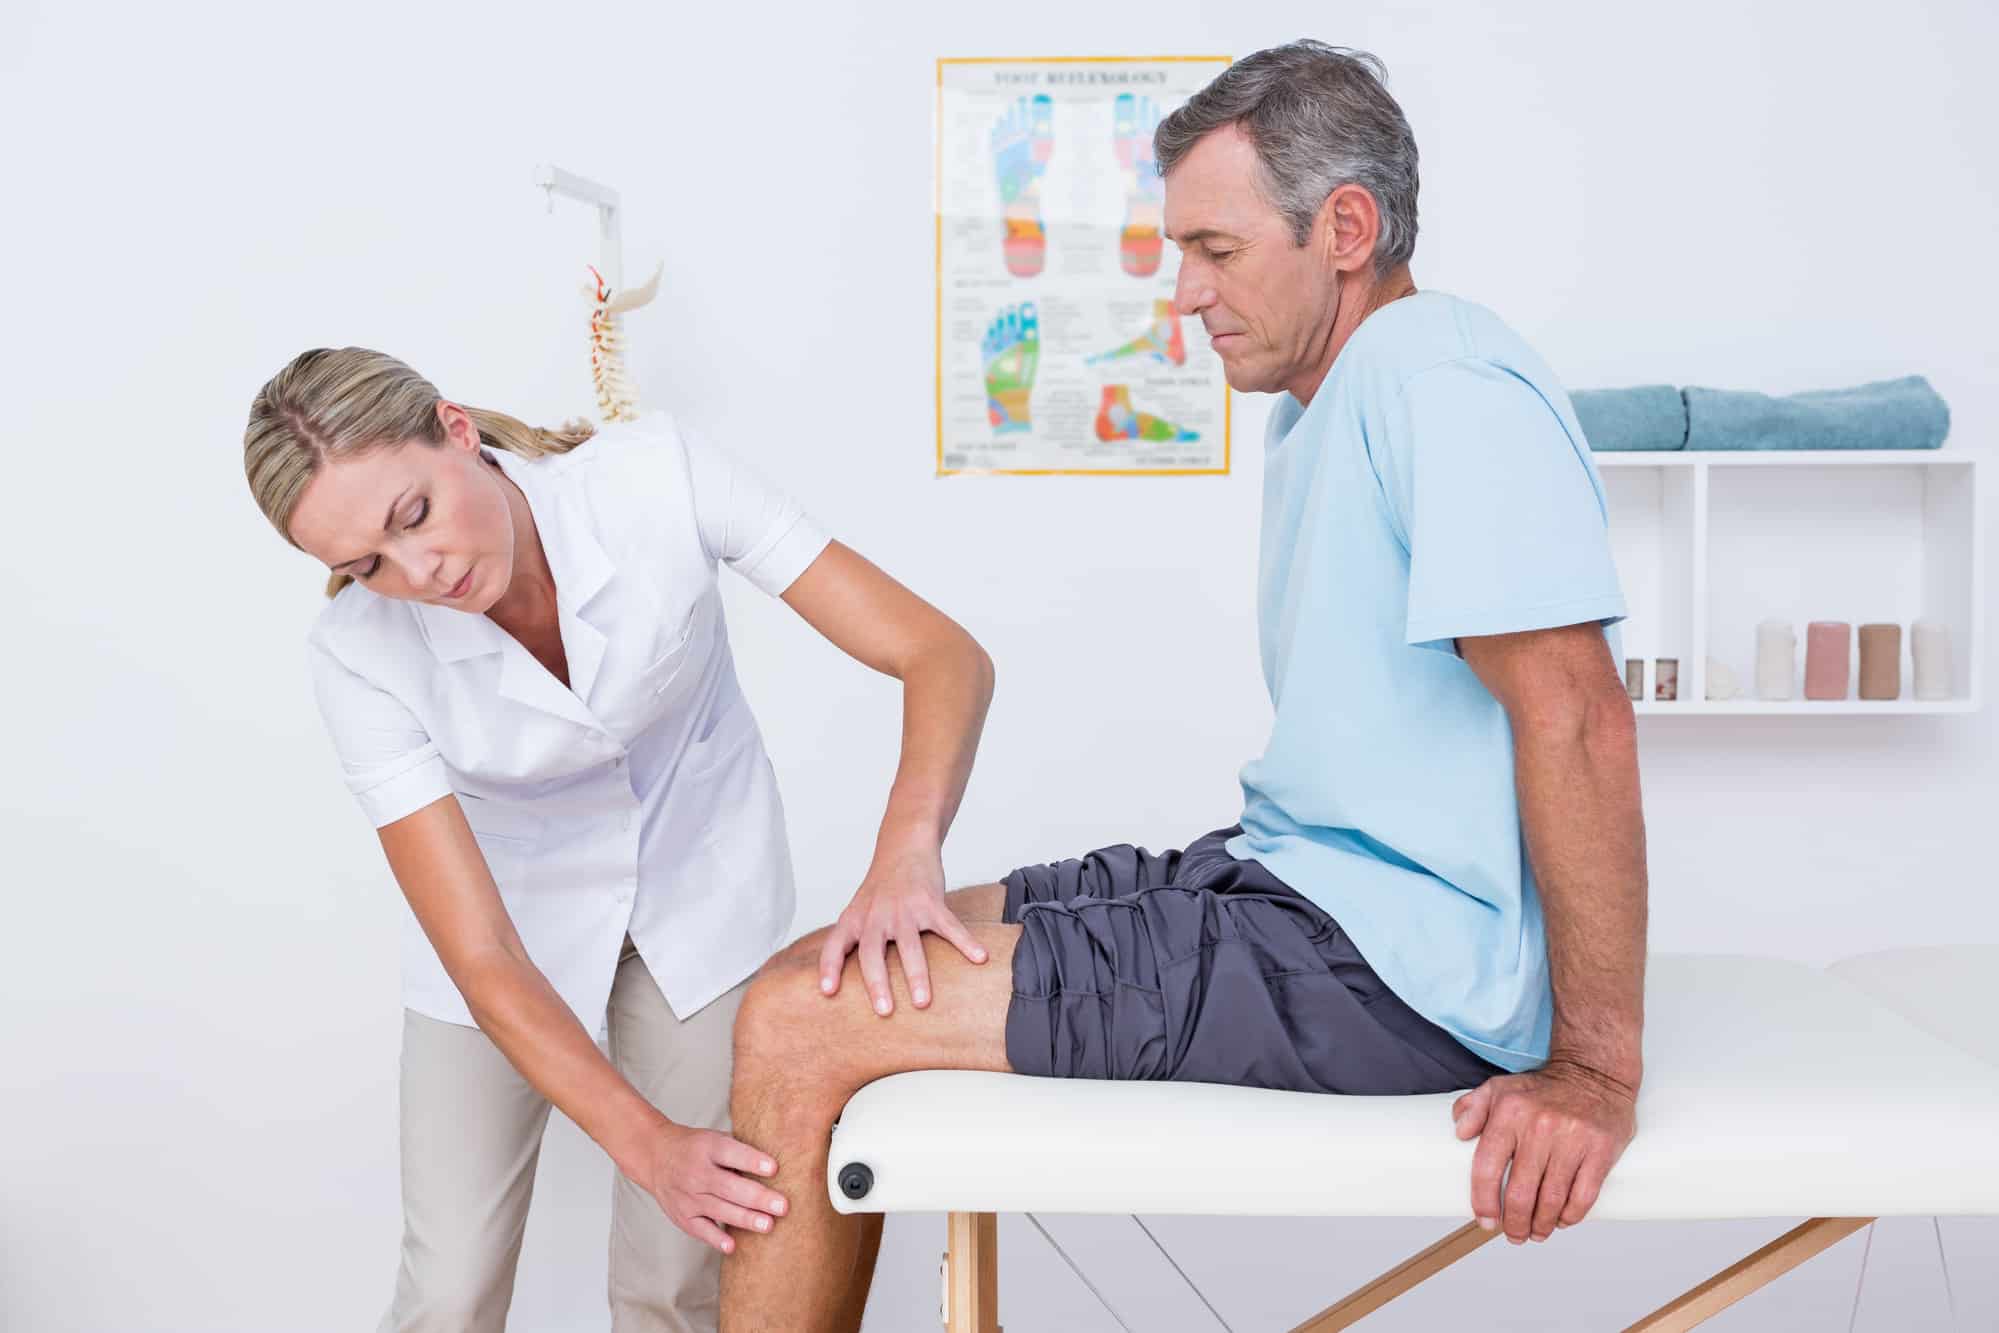 What Causes Knee Pain, And What Can I Do To Relieve It?